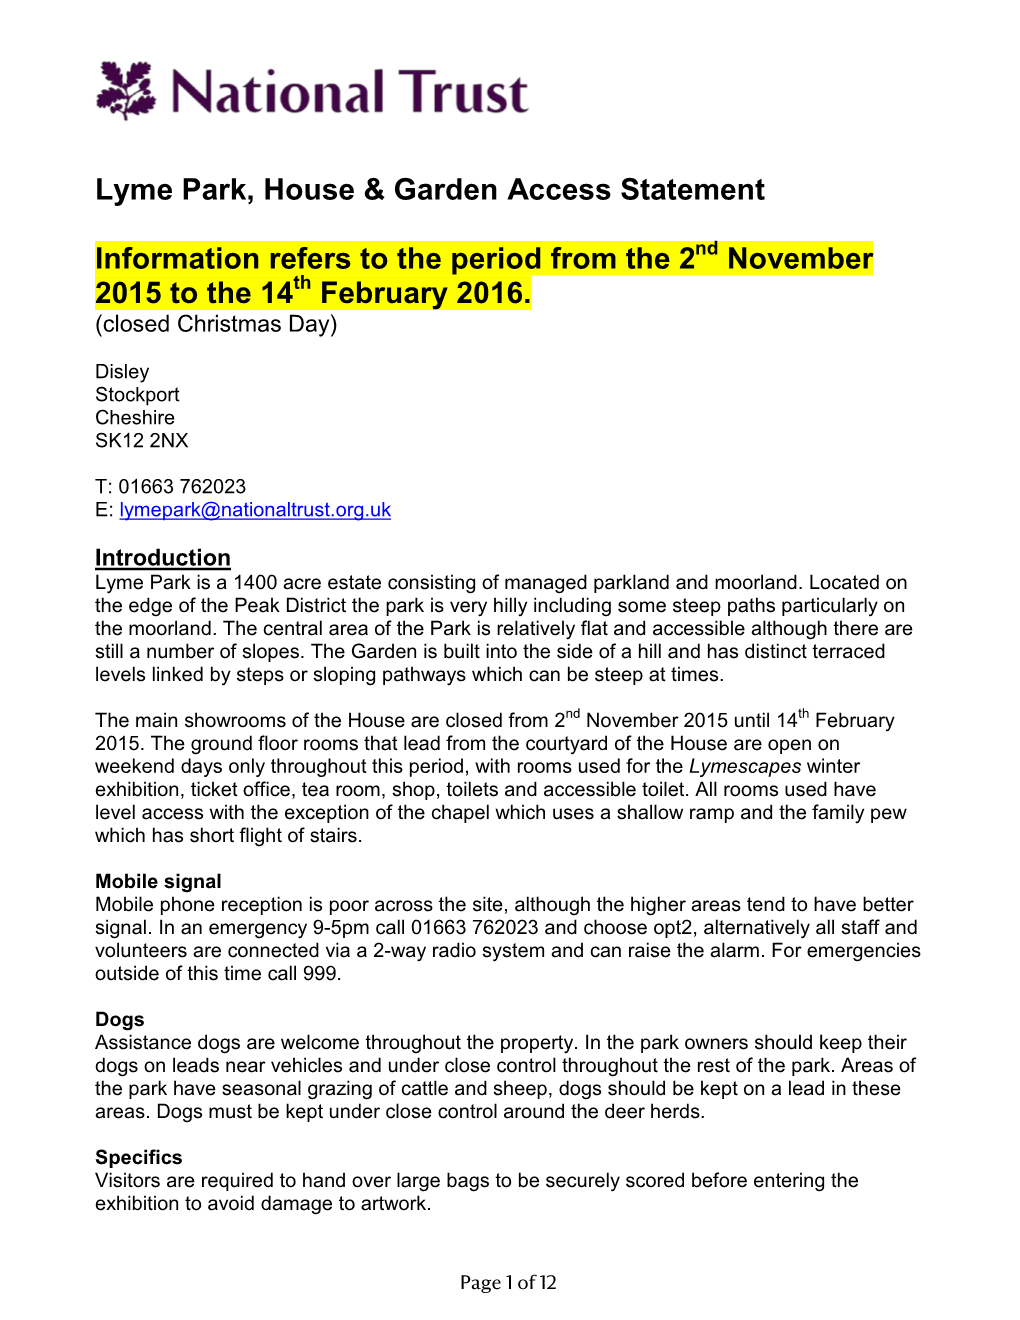 Lyme Park, House & Garden Access Statement Information Refers to The